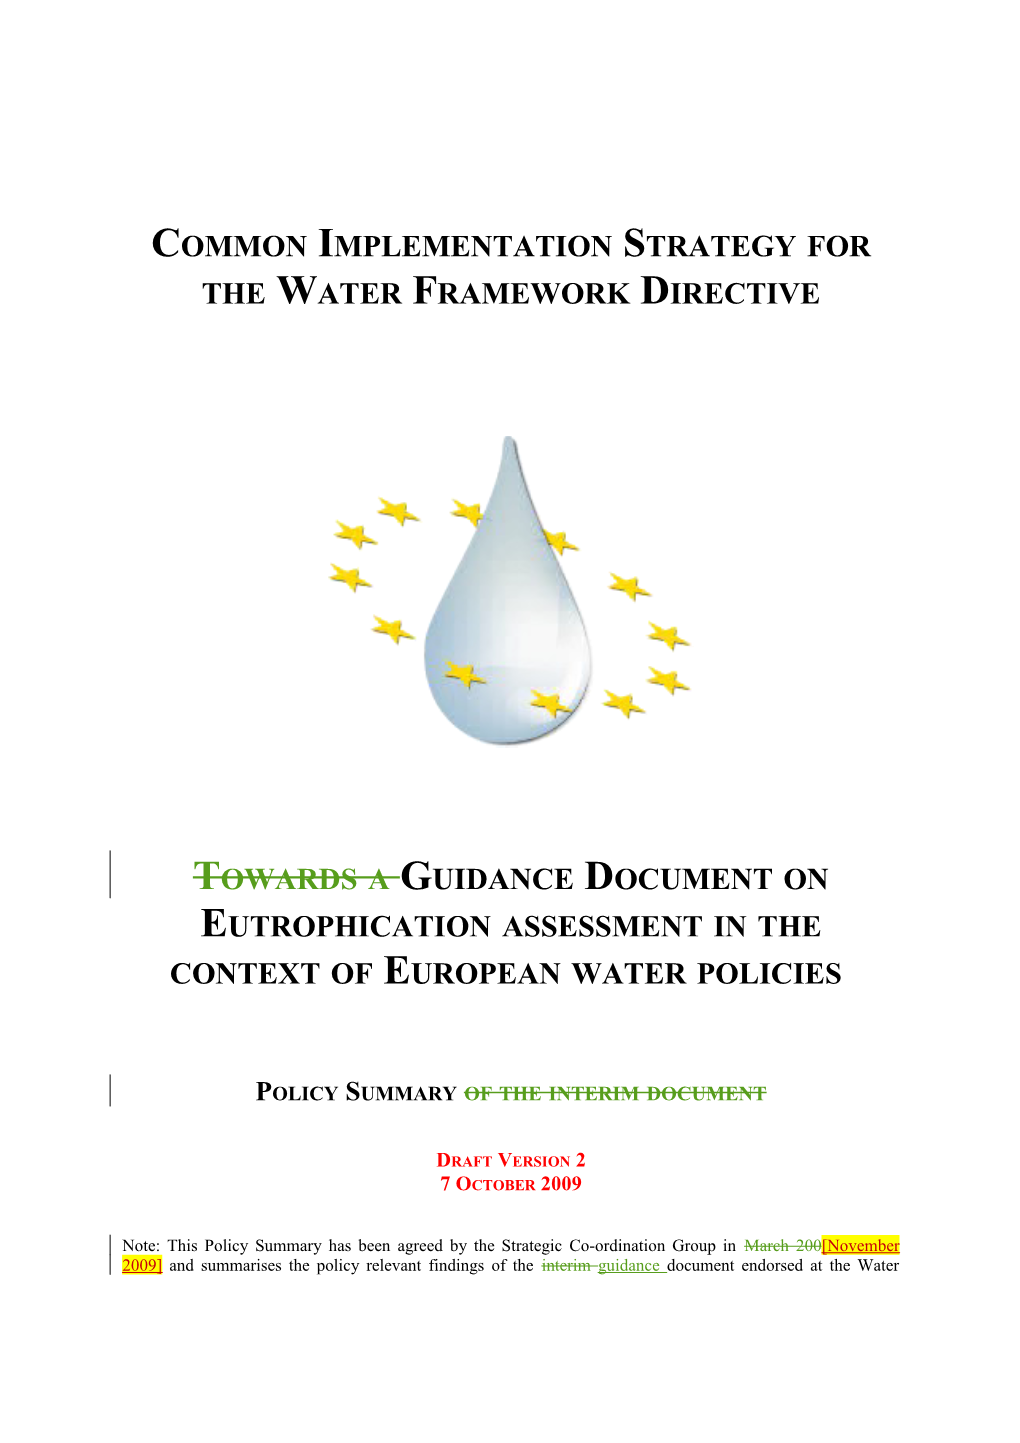 Common Implementation Strategy for the Water Framework Directive